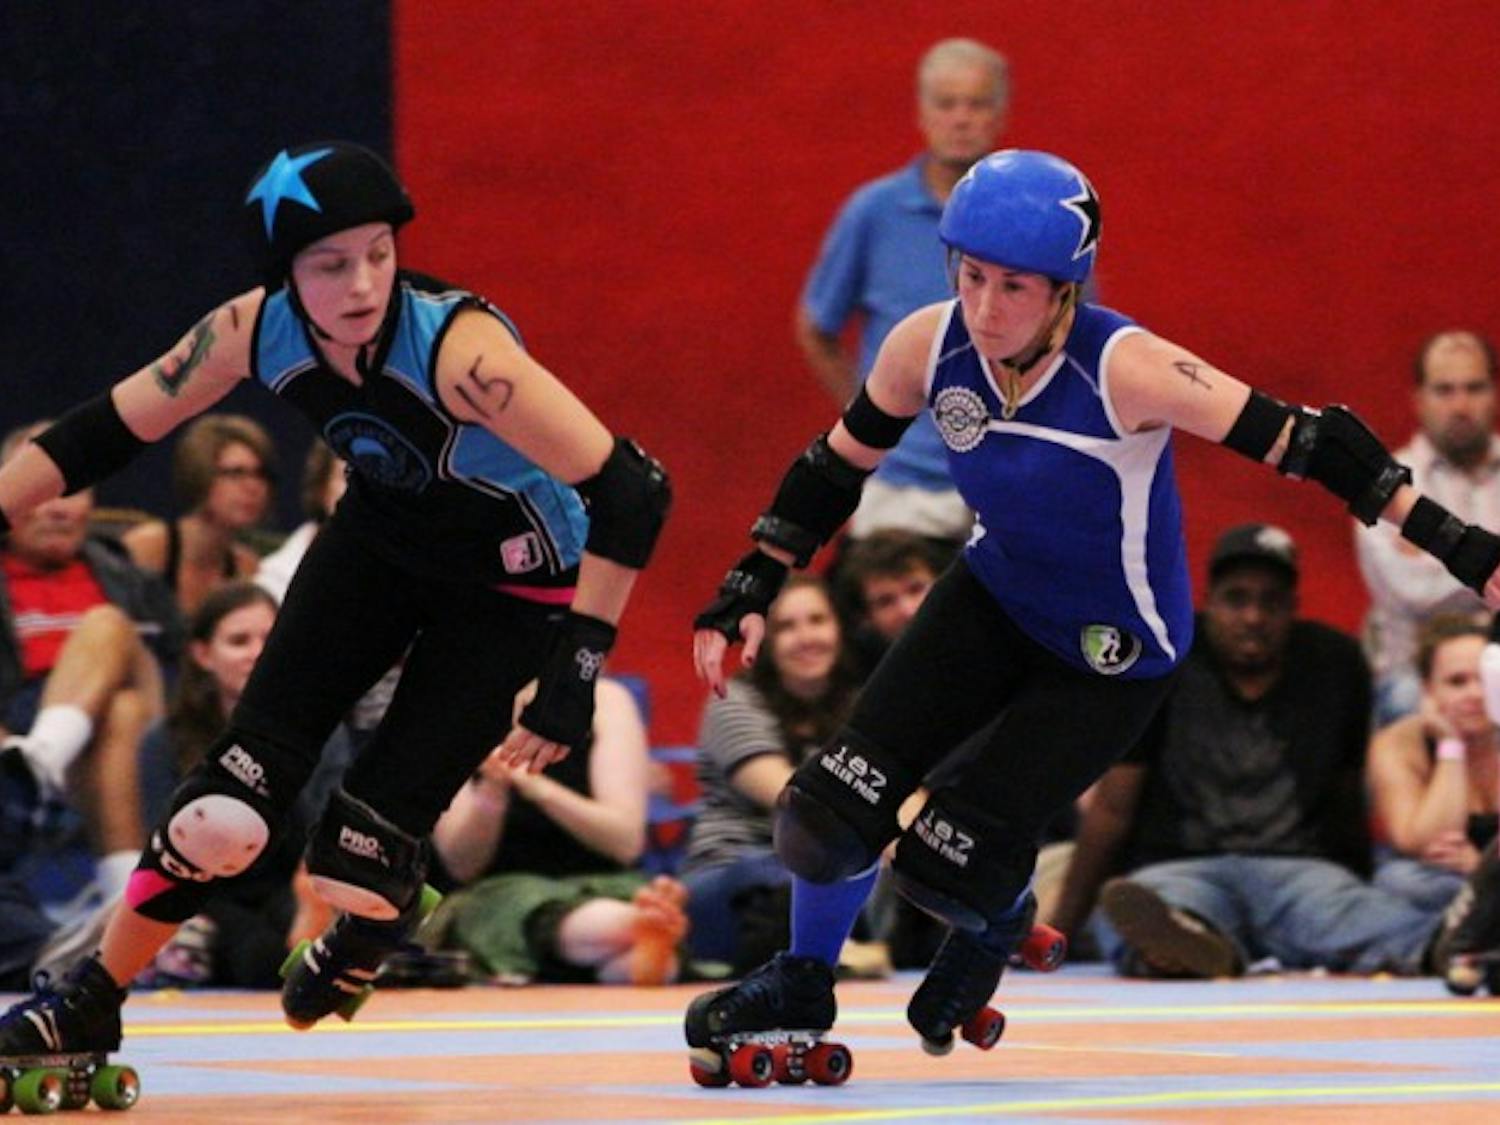 Lady Rider from the Blue Ridge Rollergirls and LeBrawn Maimes from the Gainesville Roller Rebels, both jammers, race across the rink. Identified by stars on their helmets, jammers are the only players who can score points for the team.